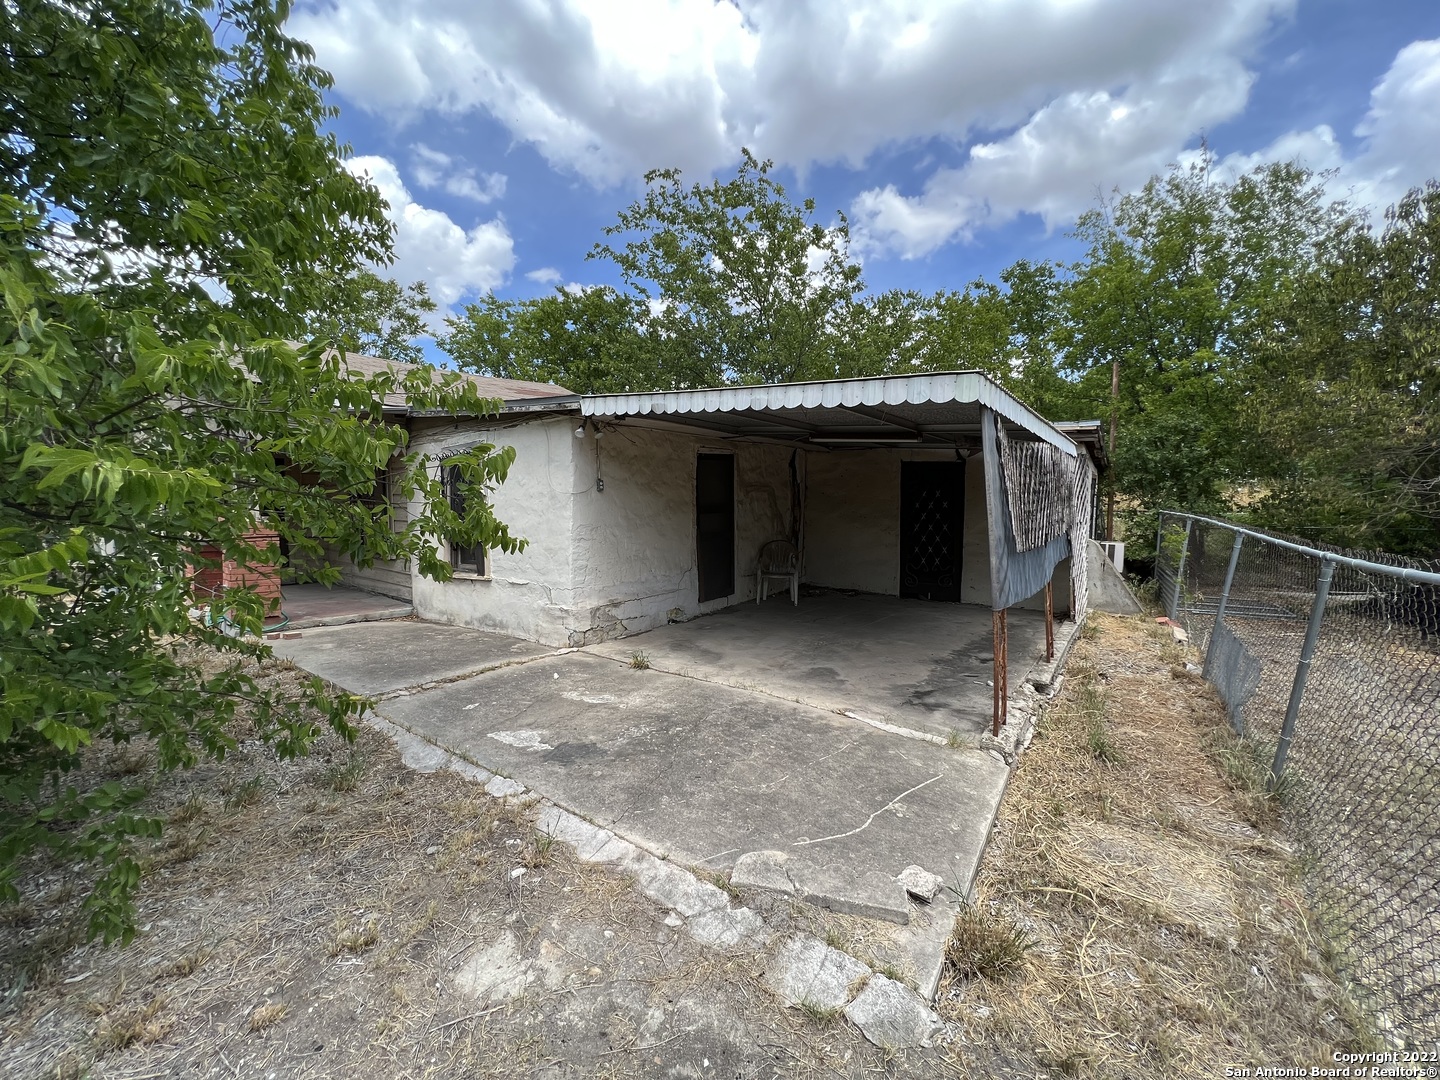 Lone Star area. Walk to shops on S Flores and walk to King William area. Centrally located. Home needs to be rehabilitated but perfect for right buyer.